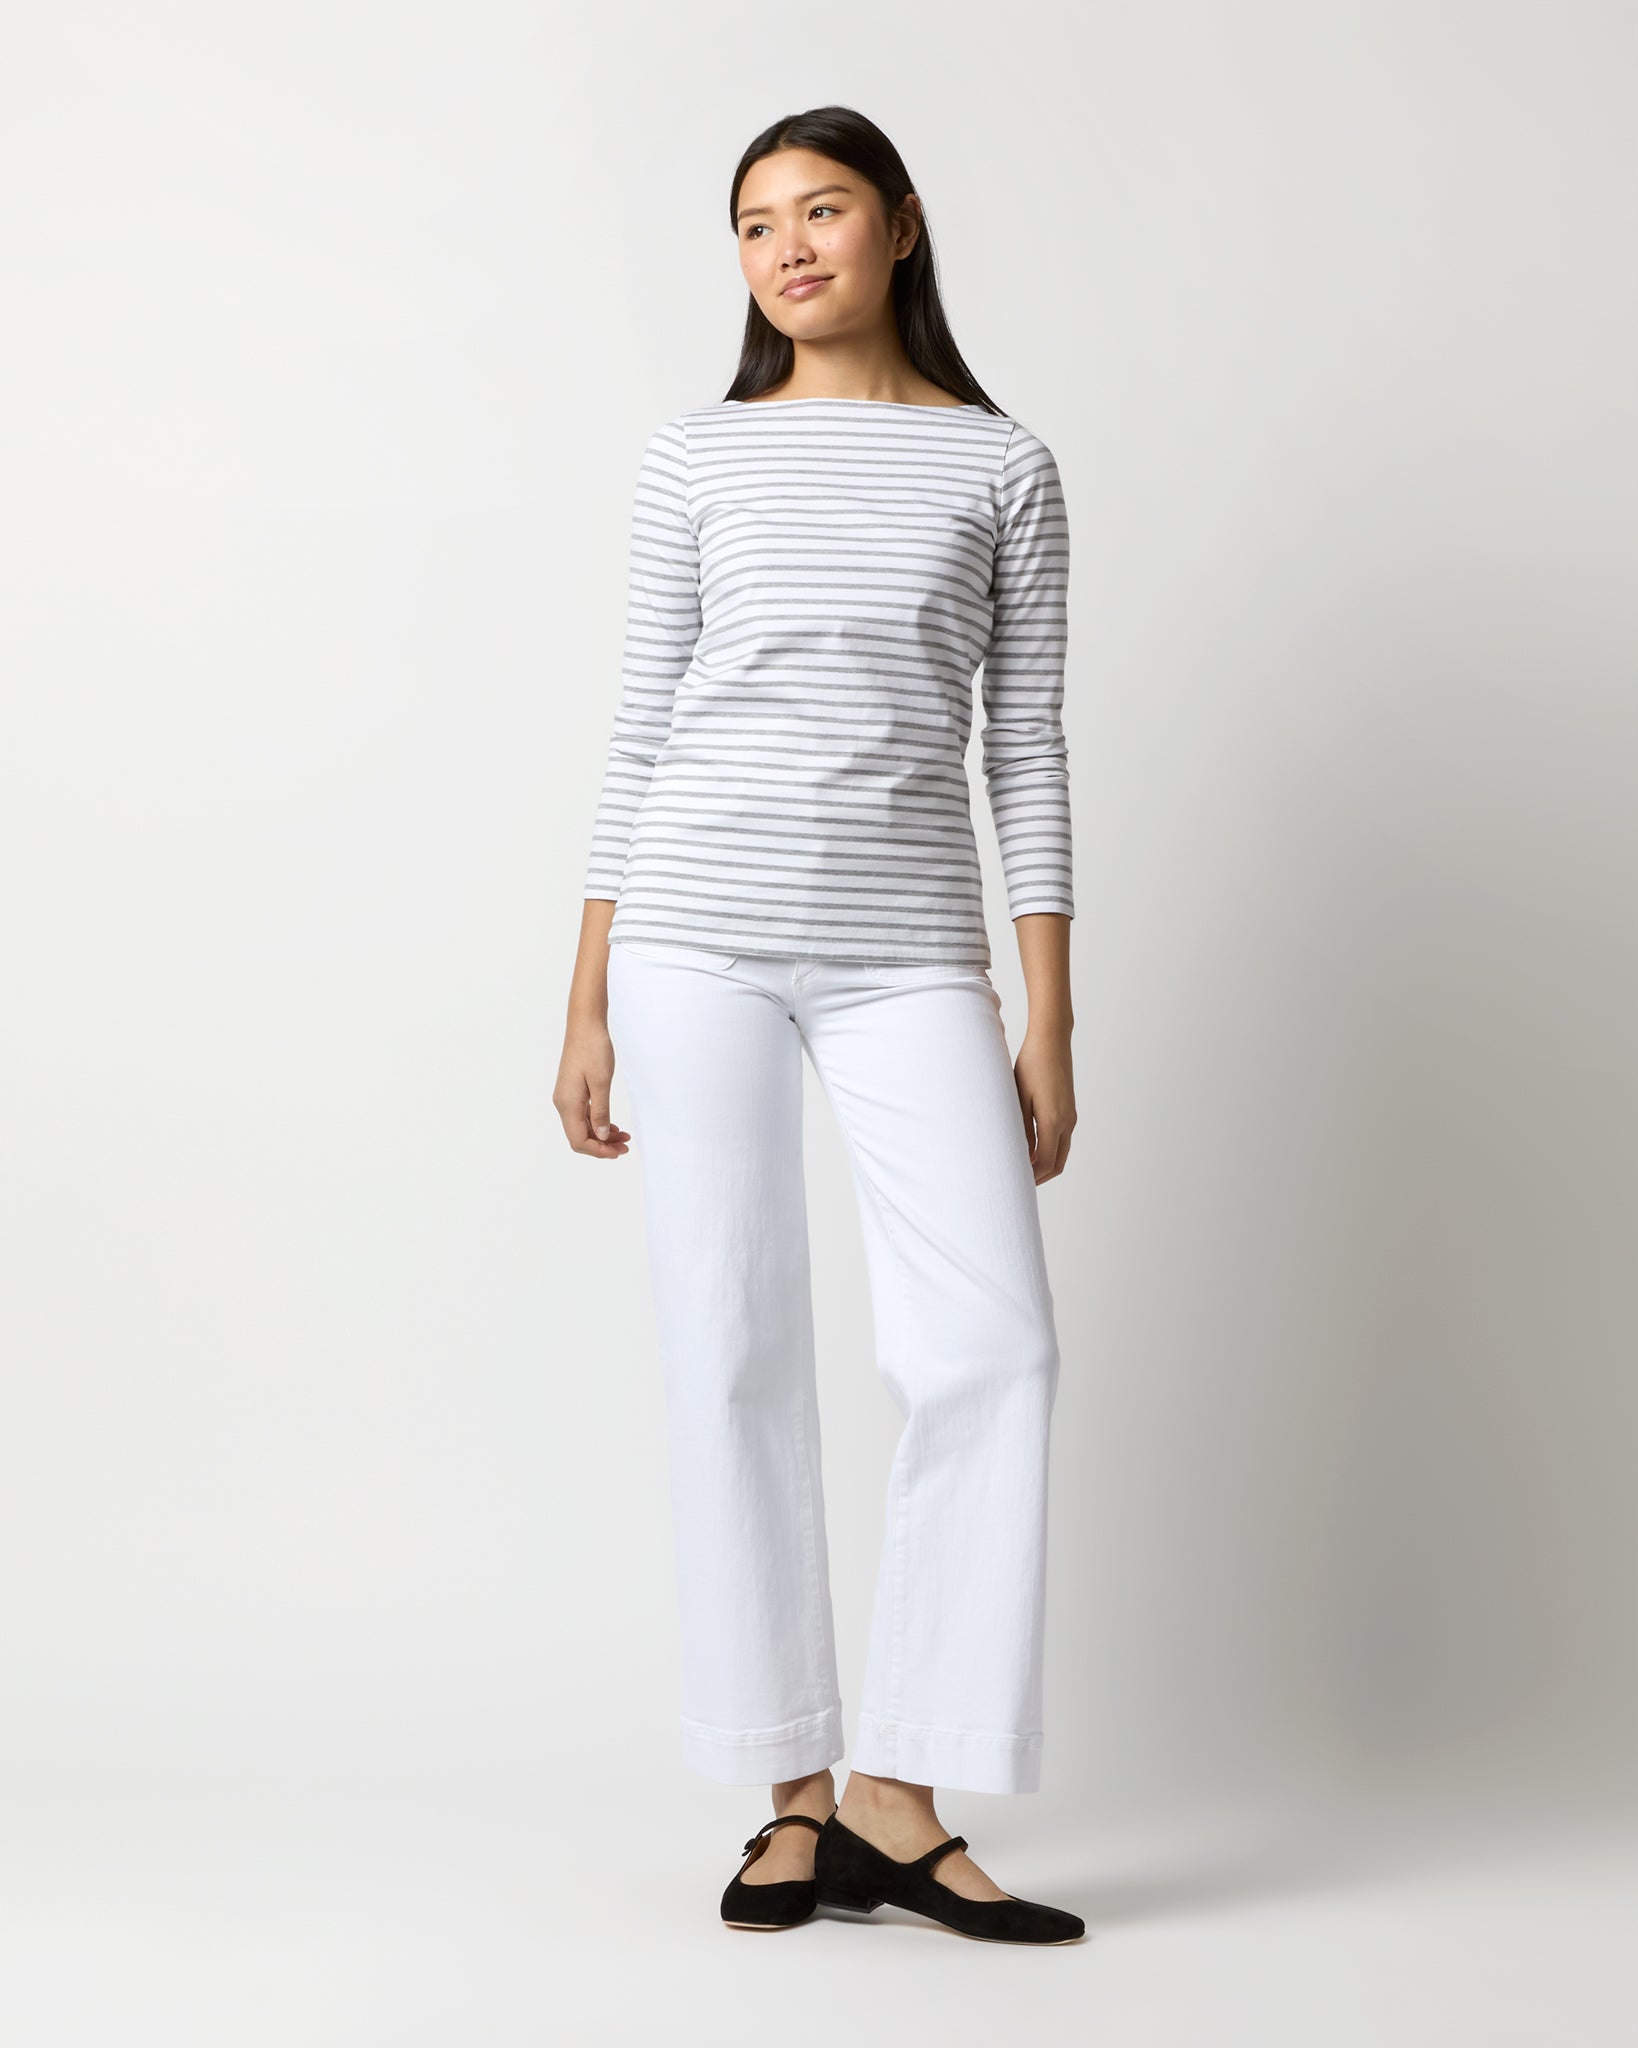 Long-Sleeved Boatneck Tee in White/Heather Grey Stripe Compact Jersey